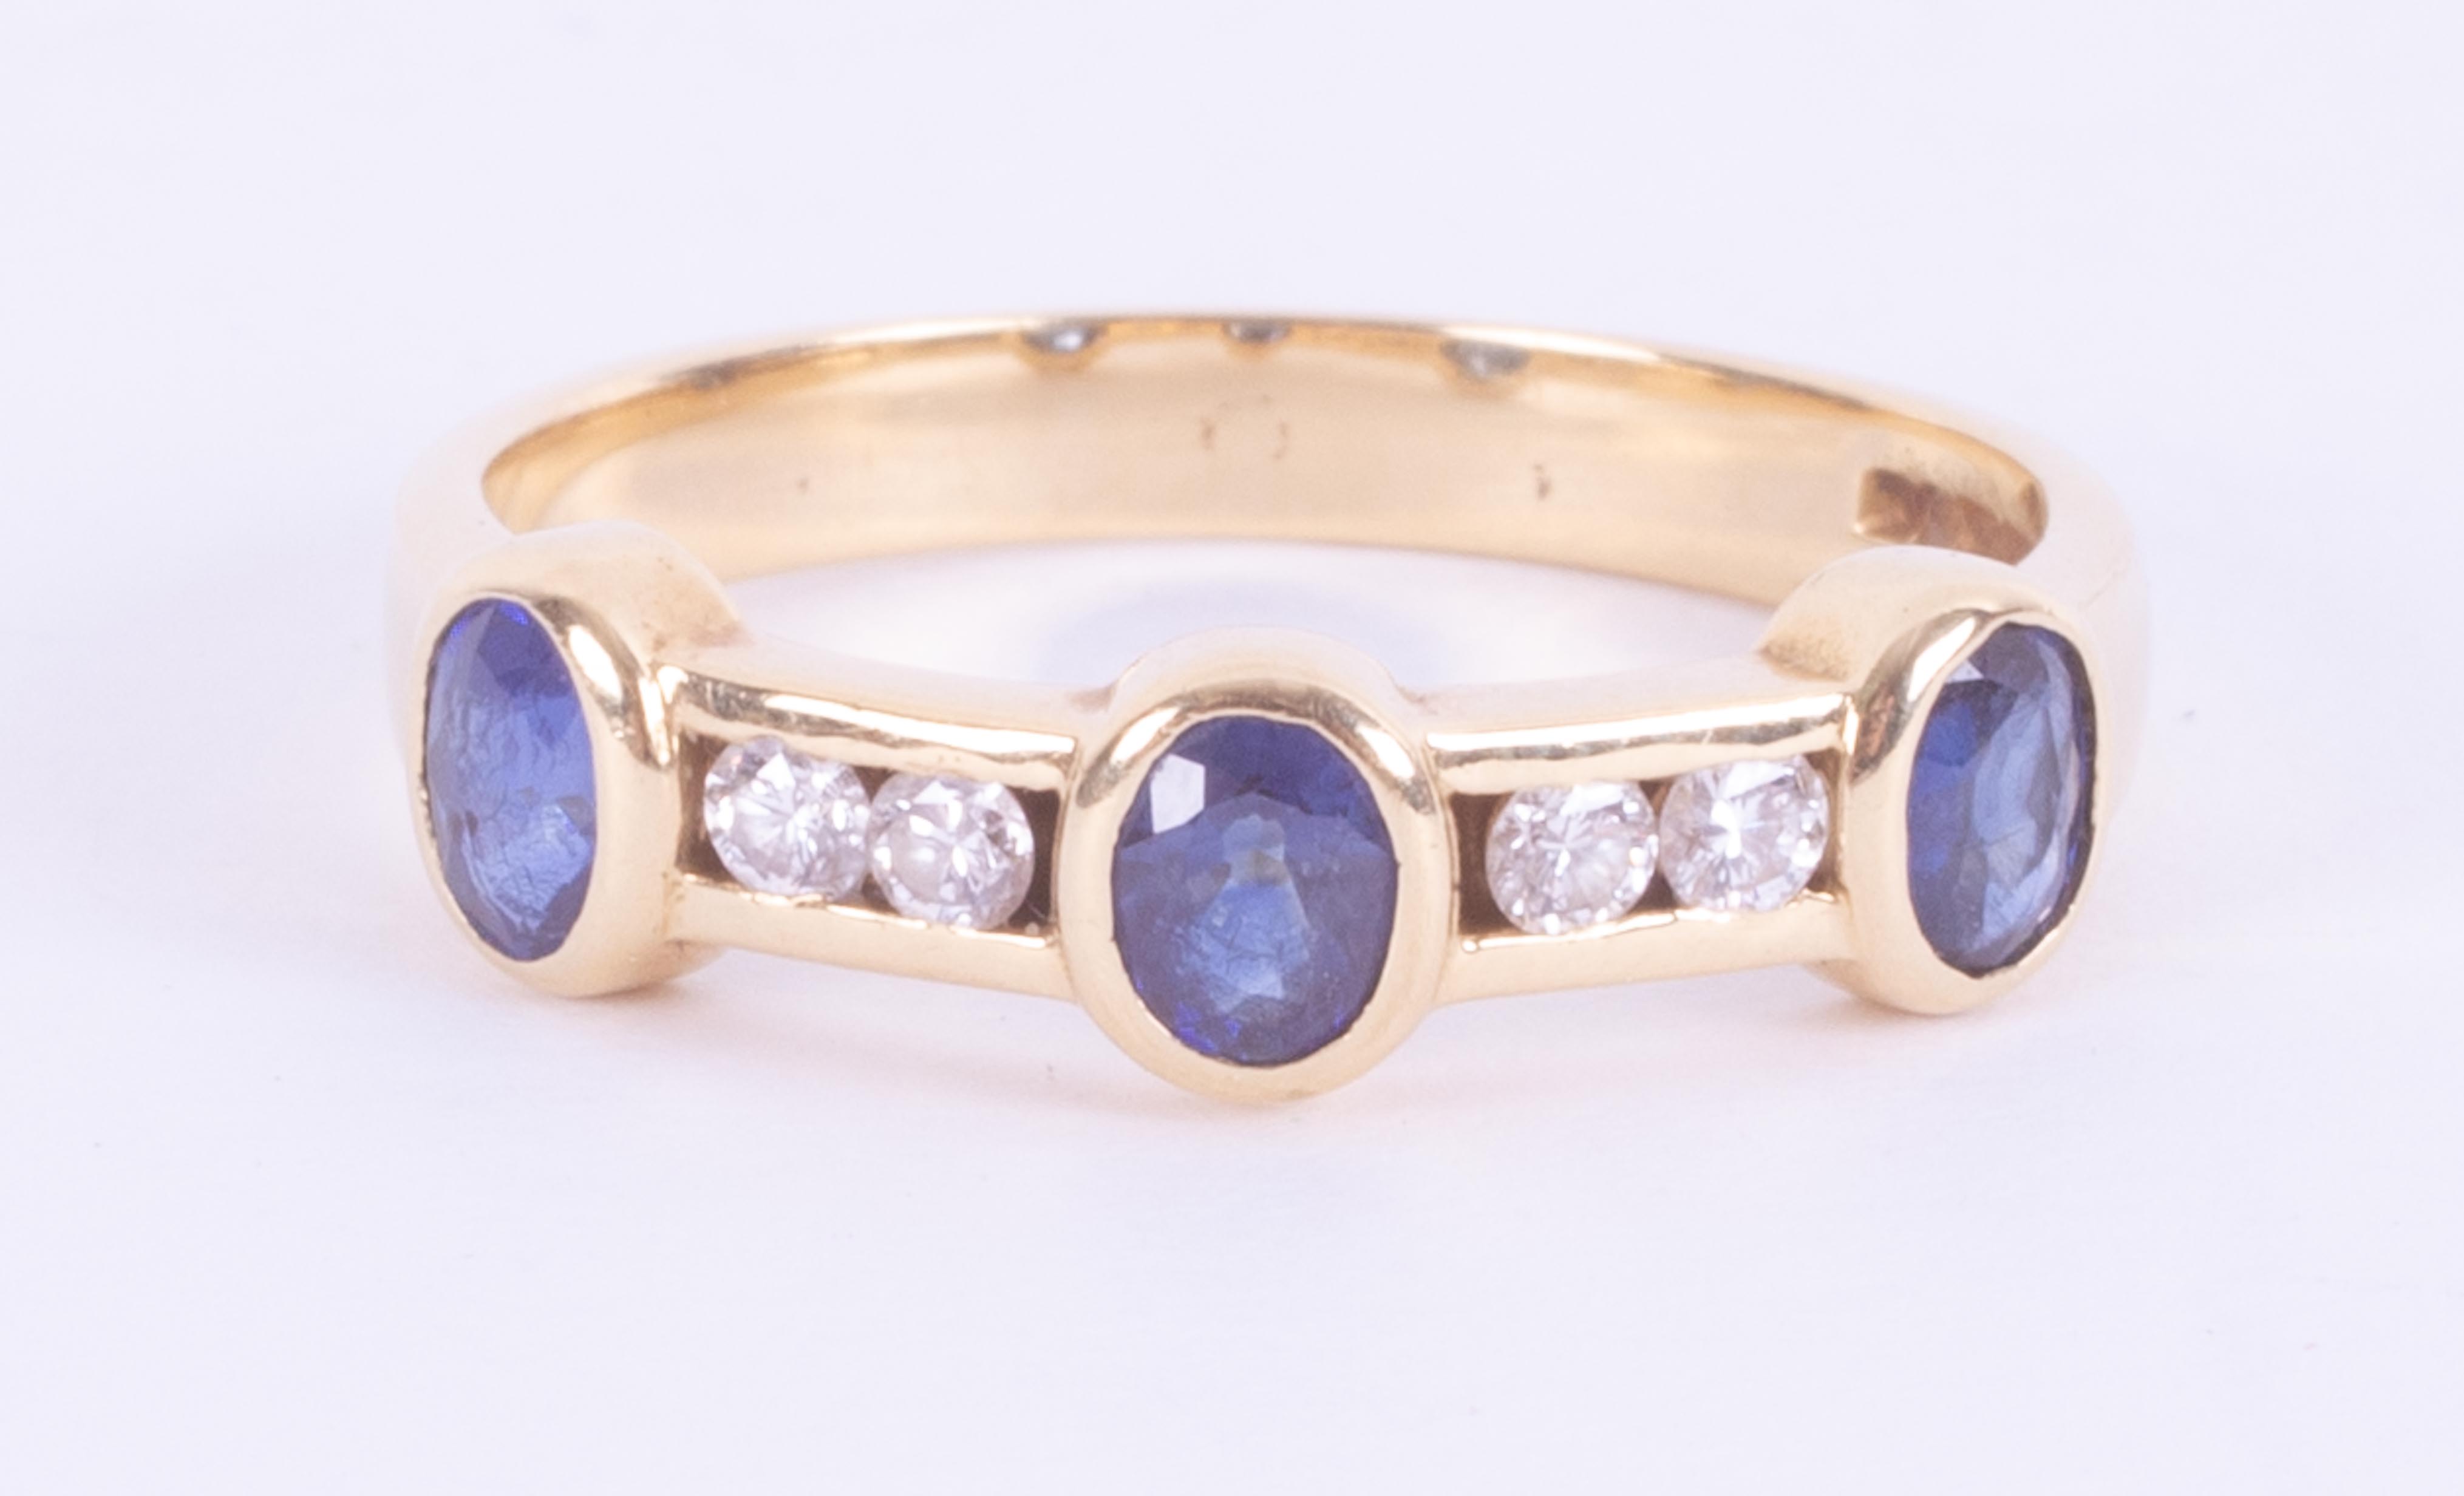 An 18ct yellow gold band set with three oval cut sapphires, total weight approx. 0.63 carats with